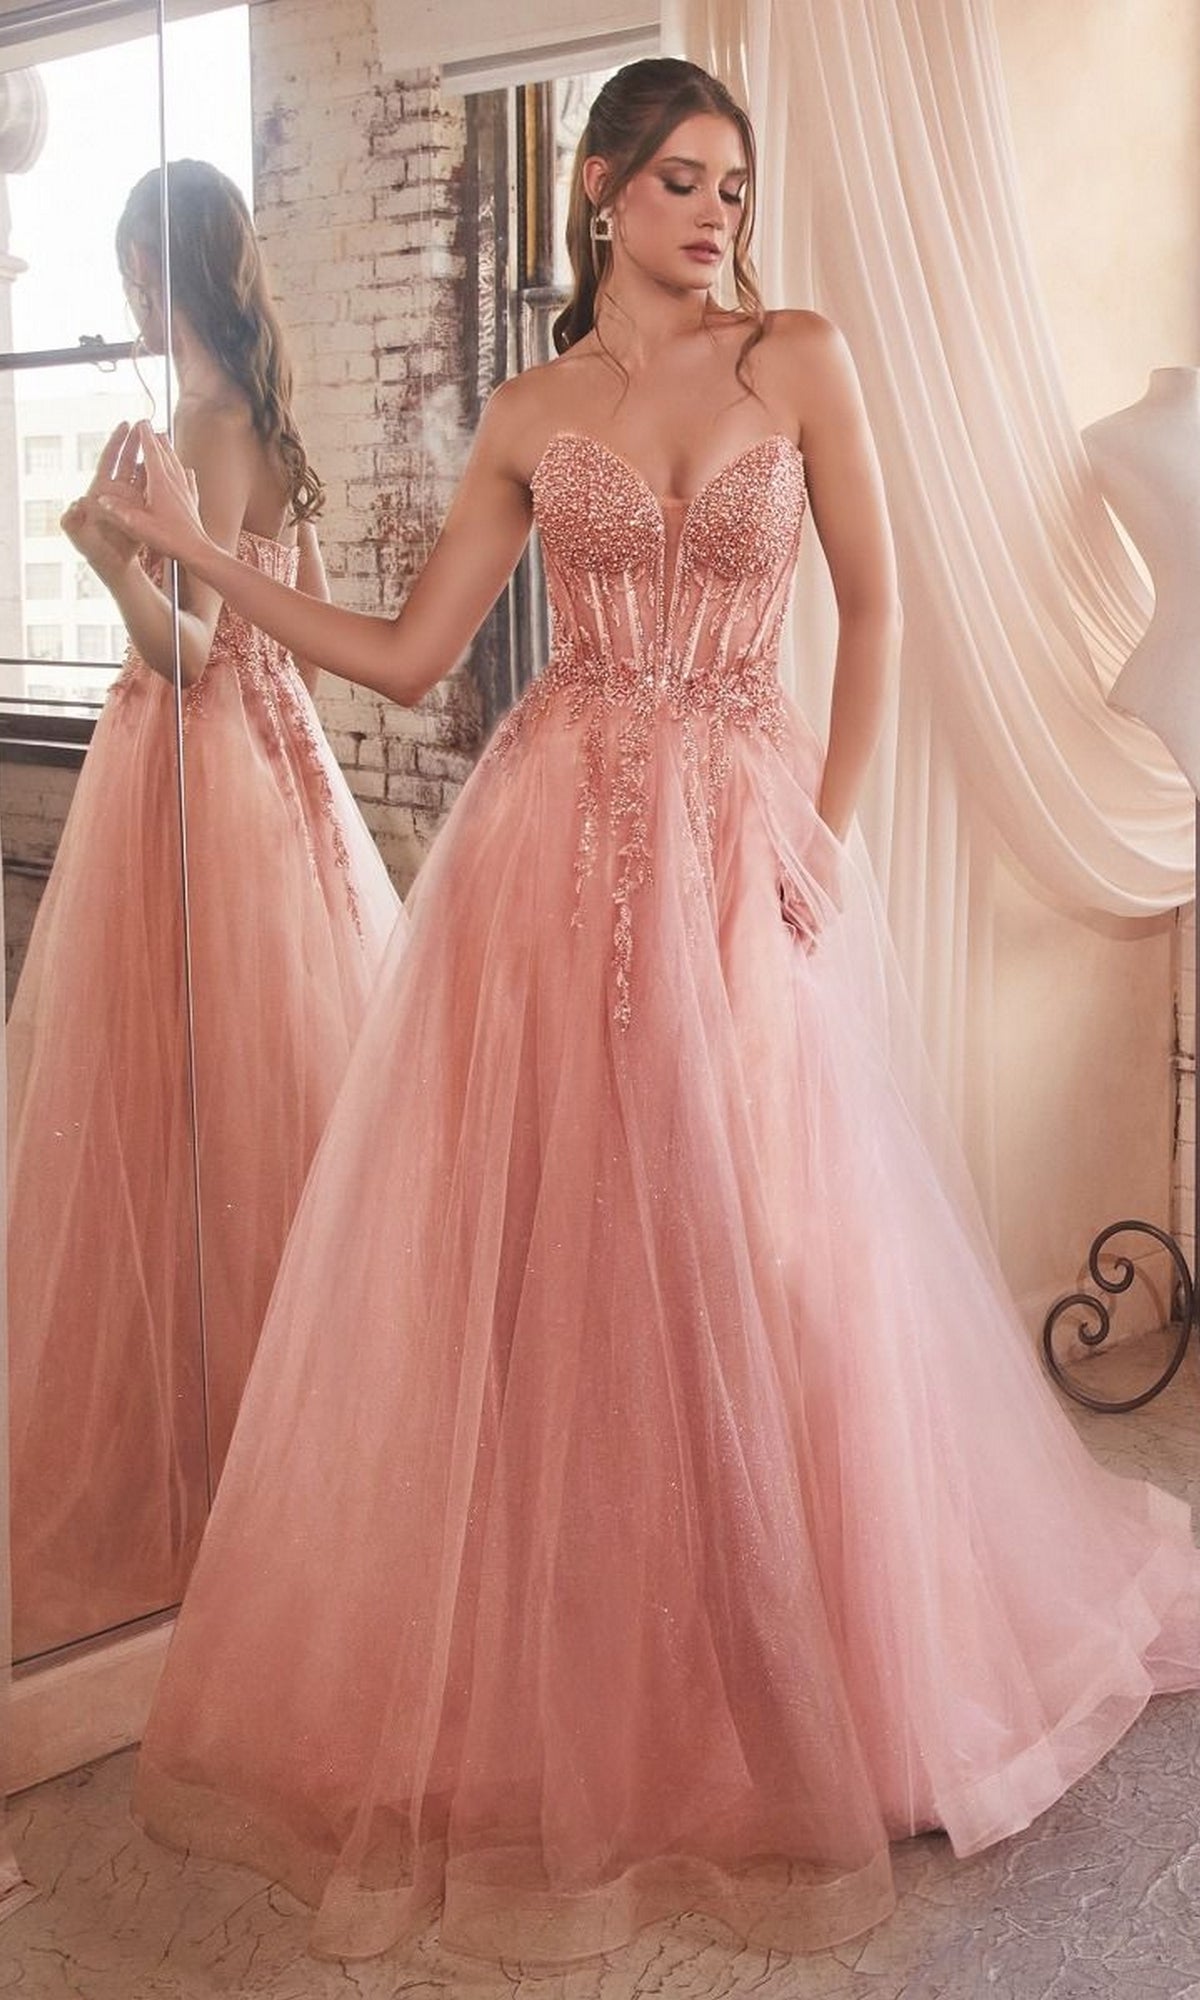 CD C148 - Lace & Tulle A-Line Prom Gown with Sheer Corset Bodice